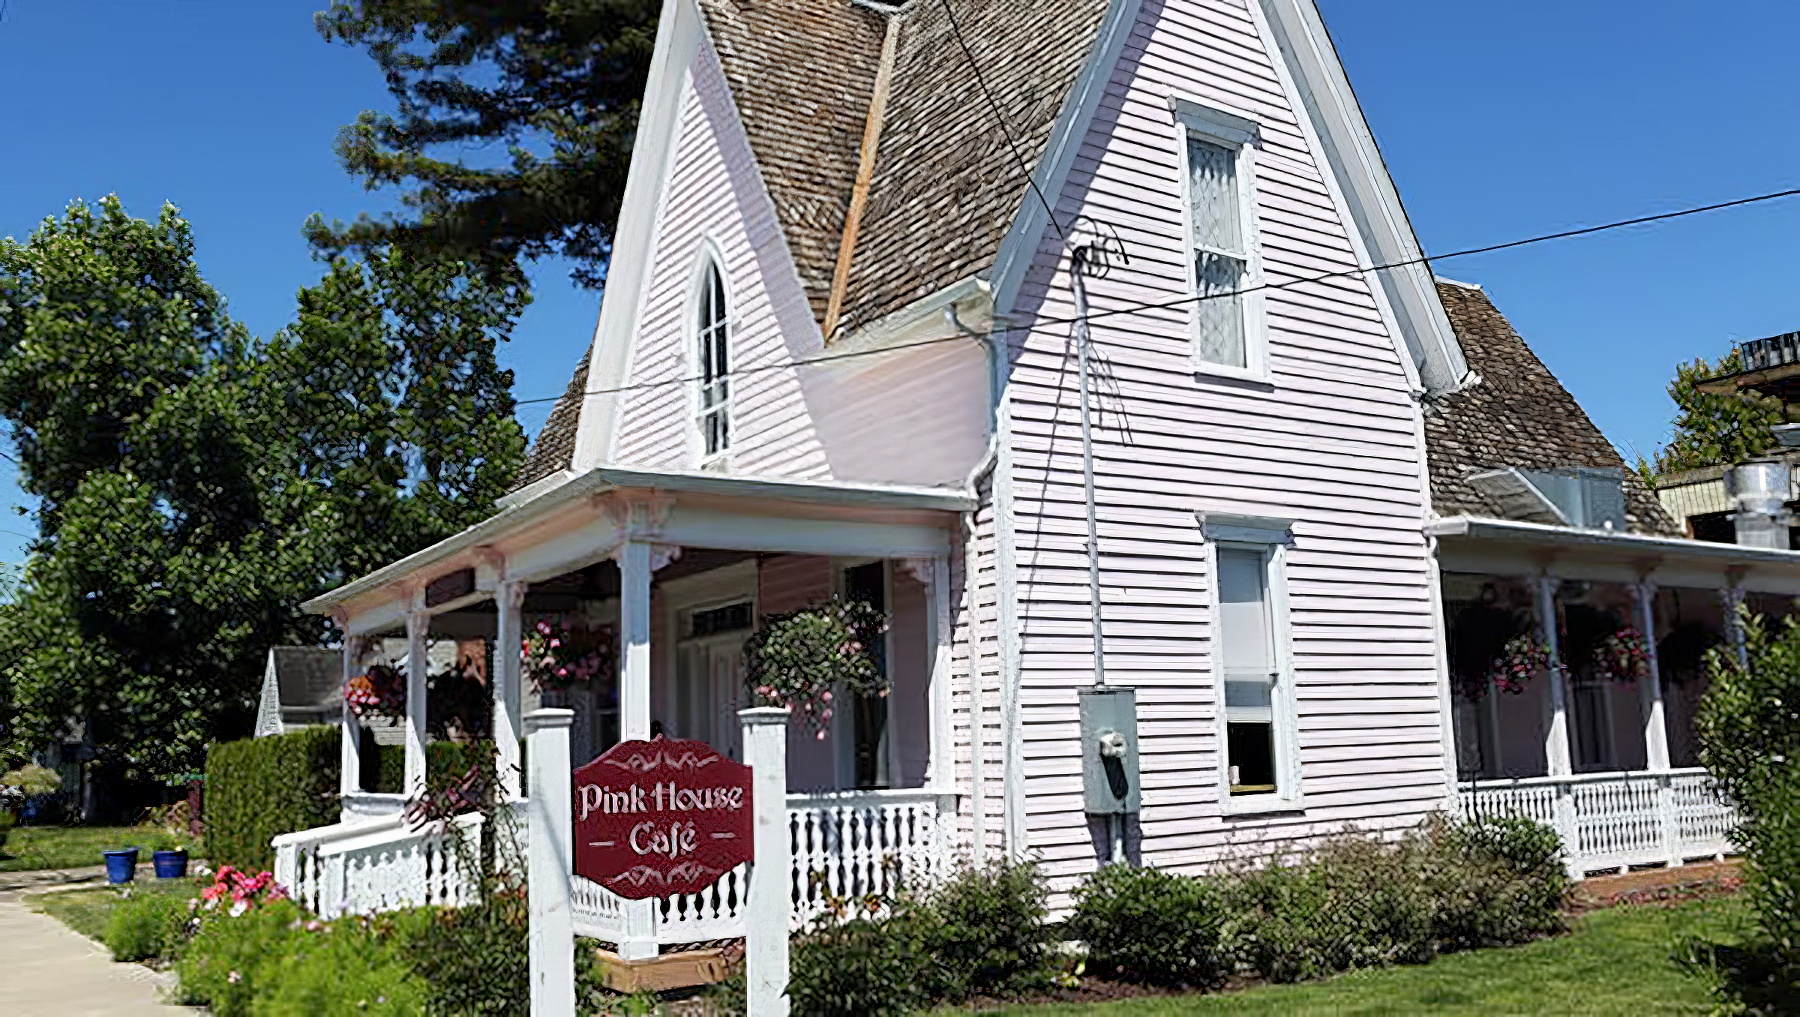 The Little Pink House That Serves Up Some Of The Best Breakfast In All Of Oregon